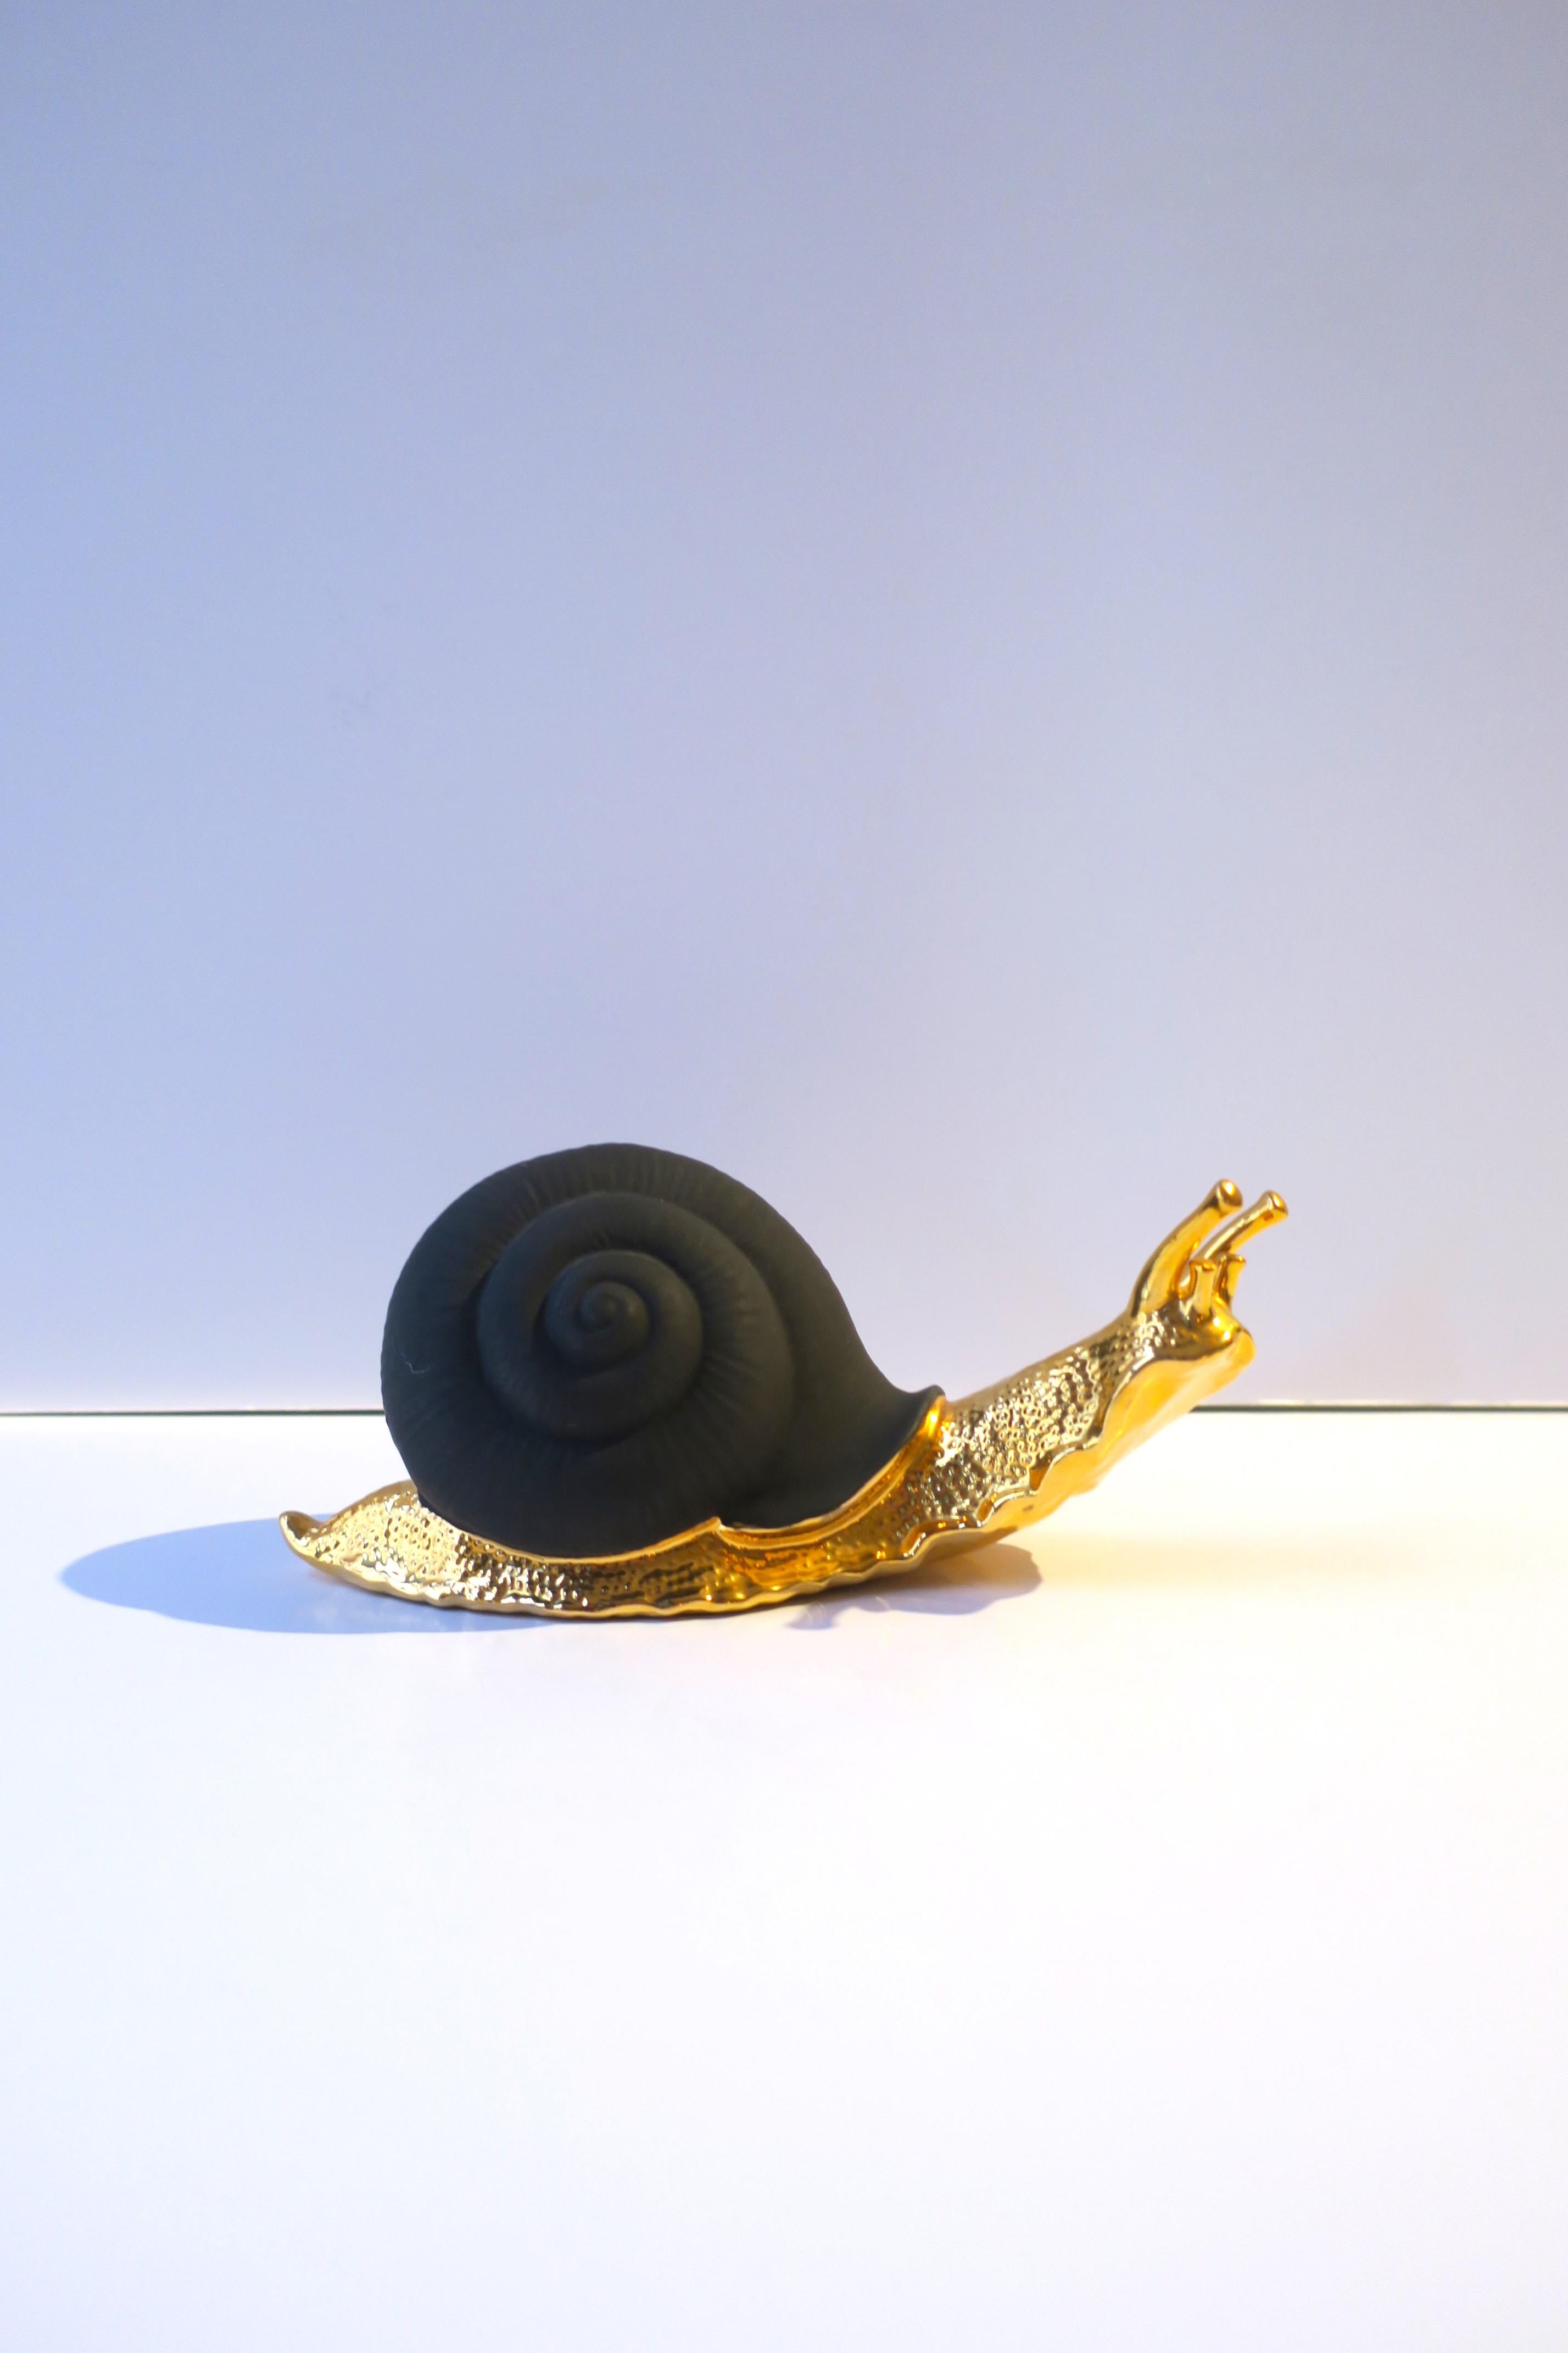 An Italian black basalt porcelain and gold snail sculpture hand-made by S. Puccini, circa late-20th century, Italy. A hand-made piece of matte black porcelain and shiny bright gold enamel, a beautiful combination. Piece could work well on cocktail